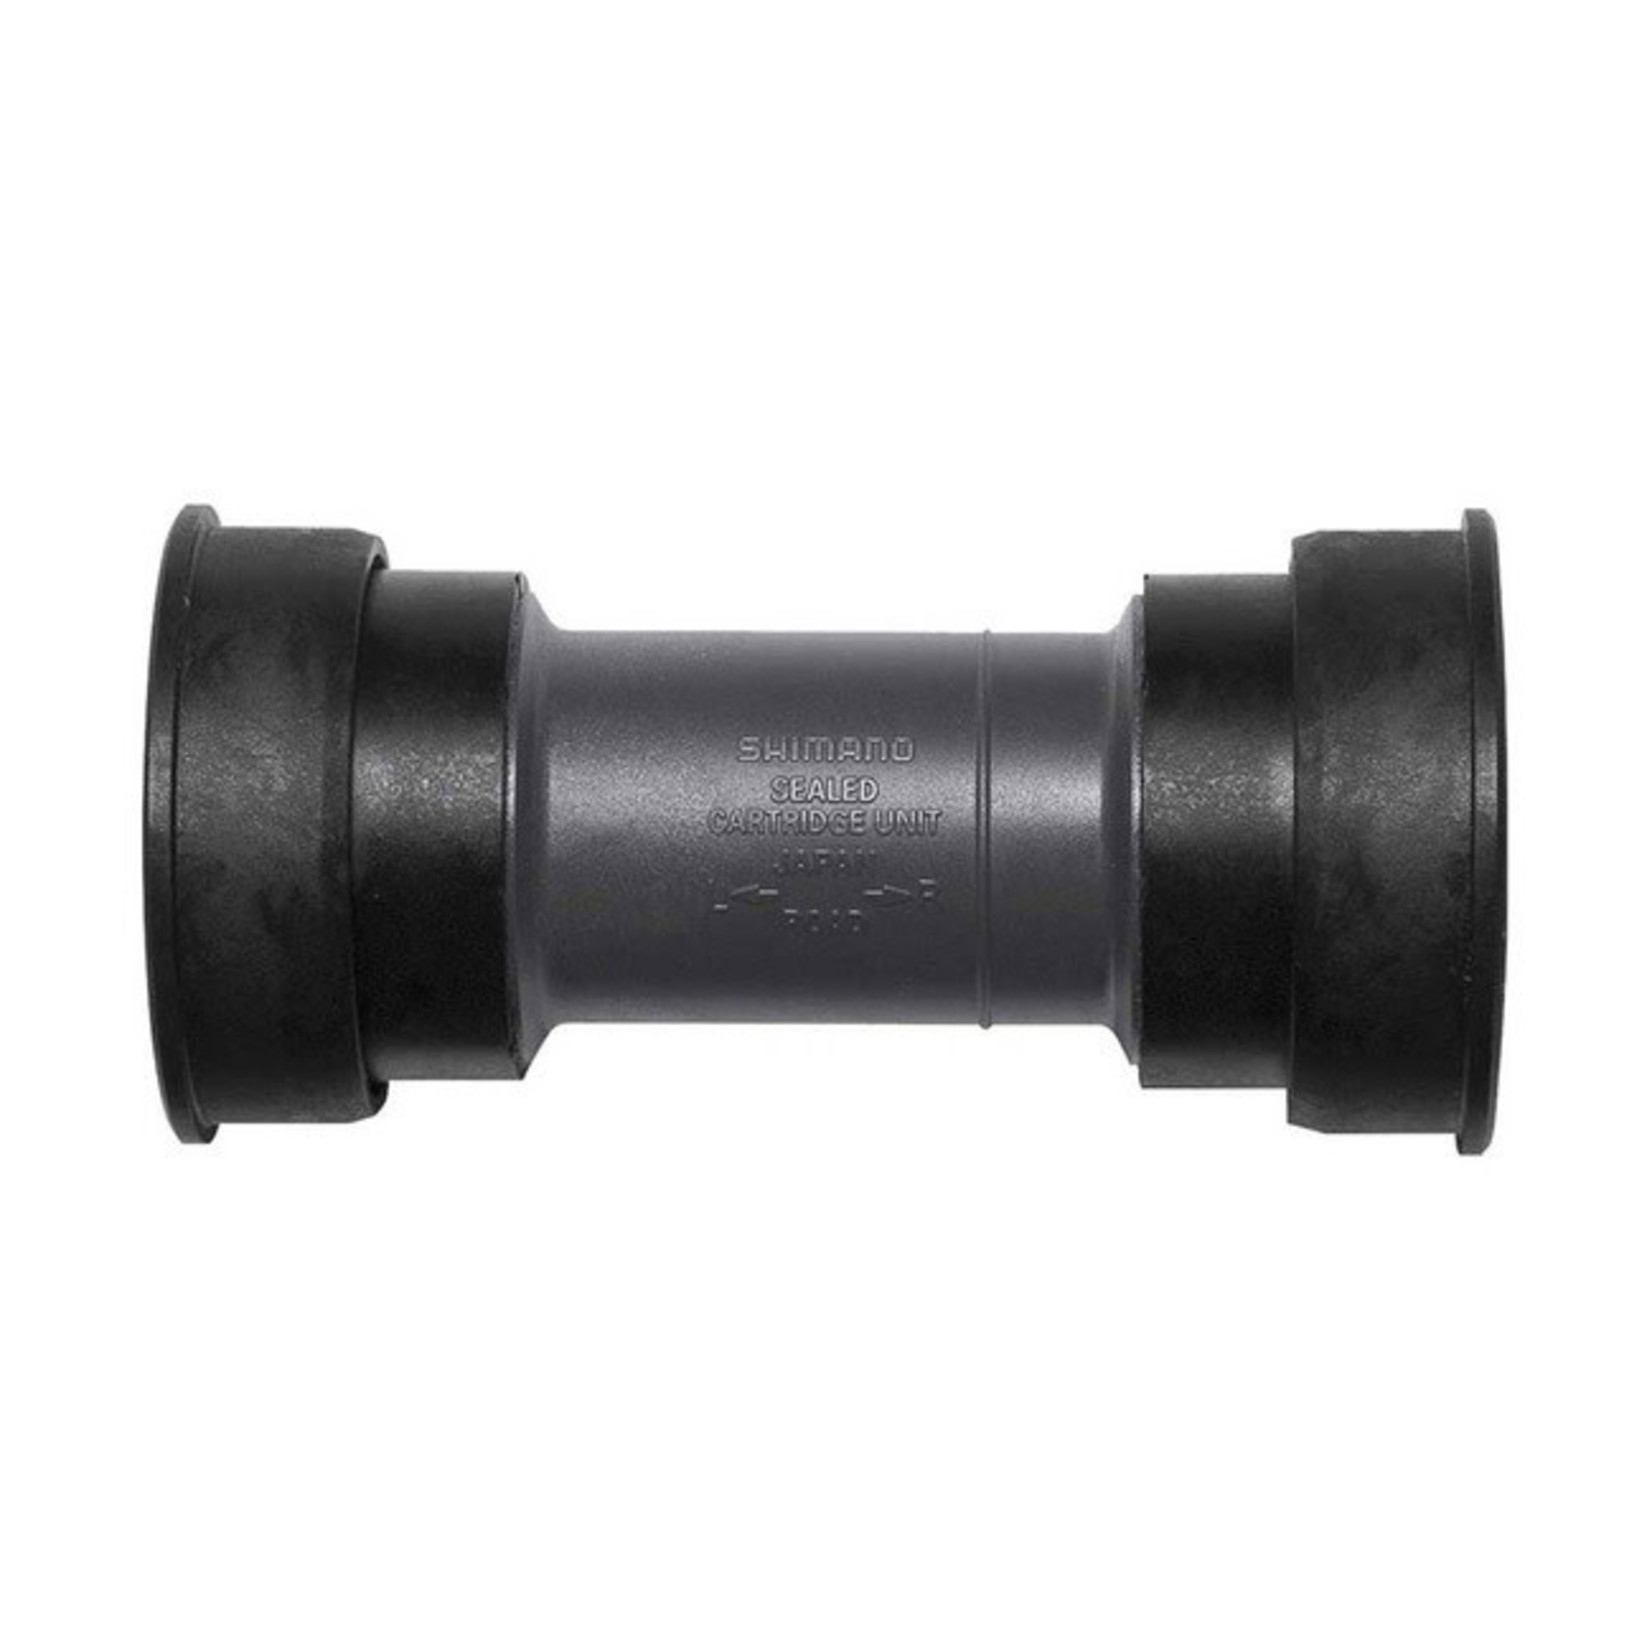 Shimano Parts > SHIMANO BOTTOM BRACKET, SM-BB92-41B, PRESS FIT TYPE FOR ROAD, RIGHT & LEFT ADAPTER